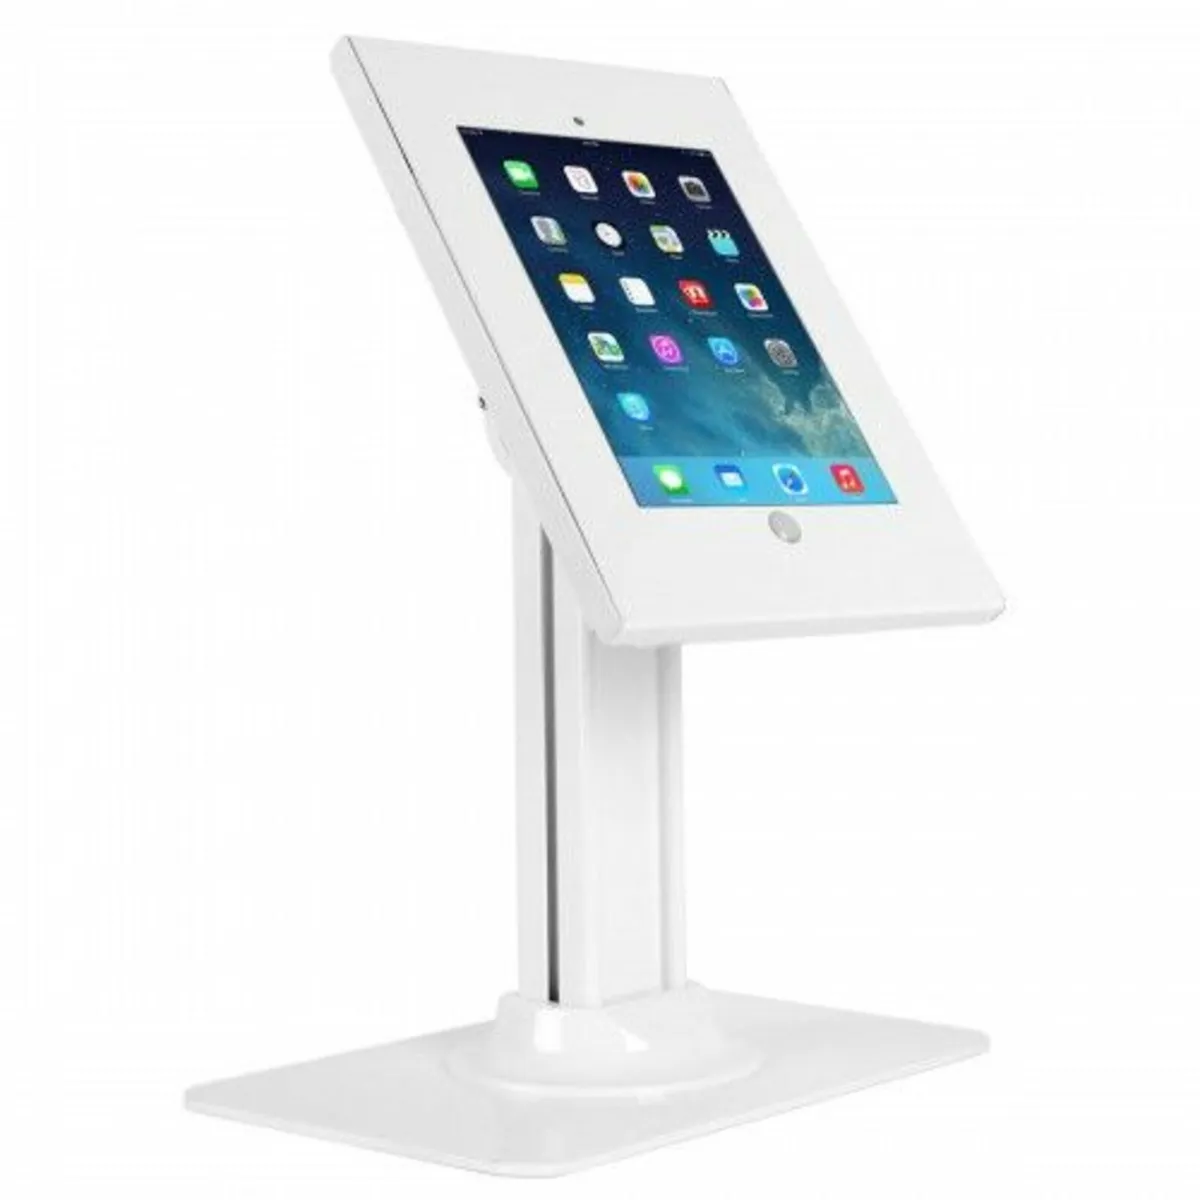 ipad/tablet stands ideal for queueing systems - Image 1